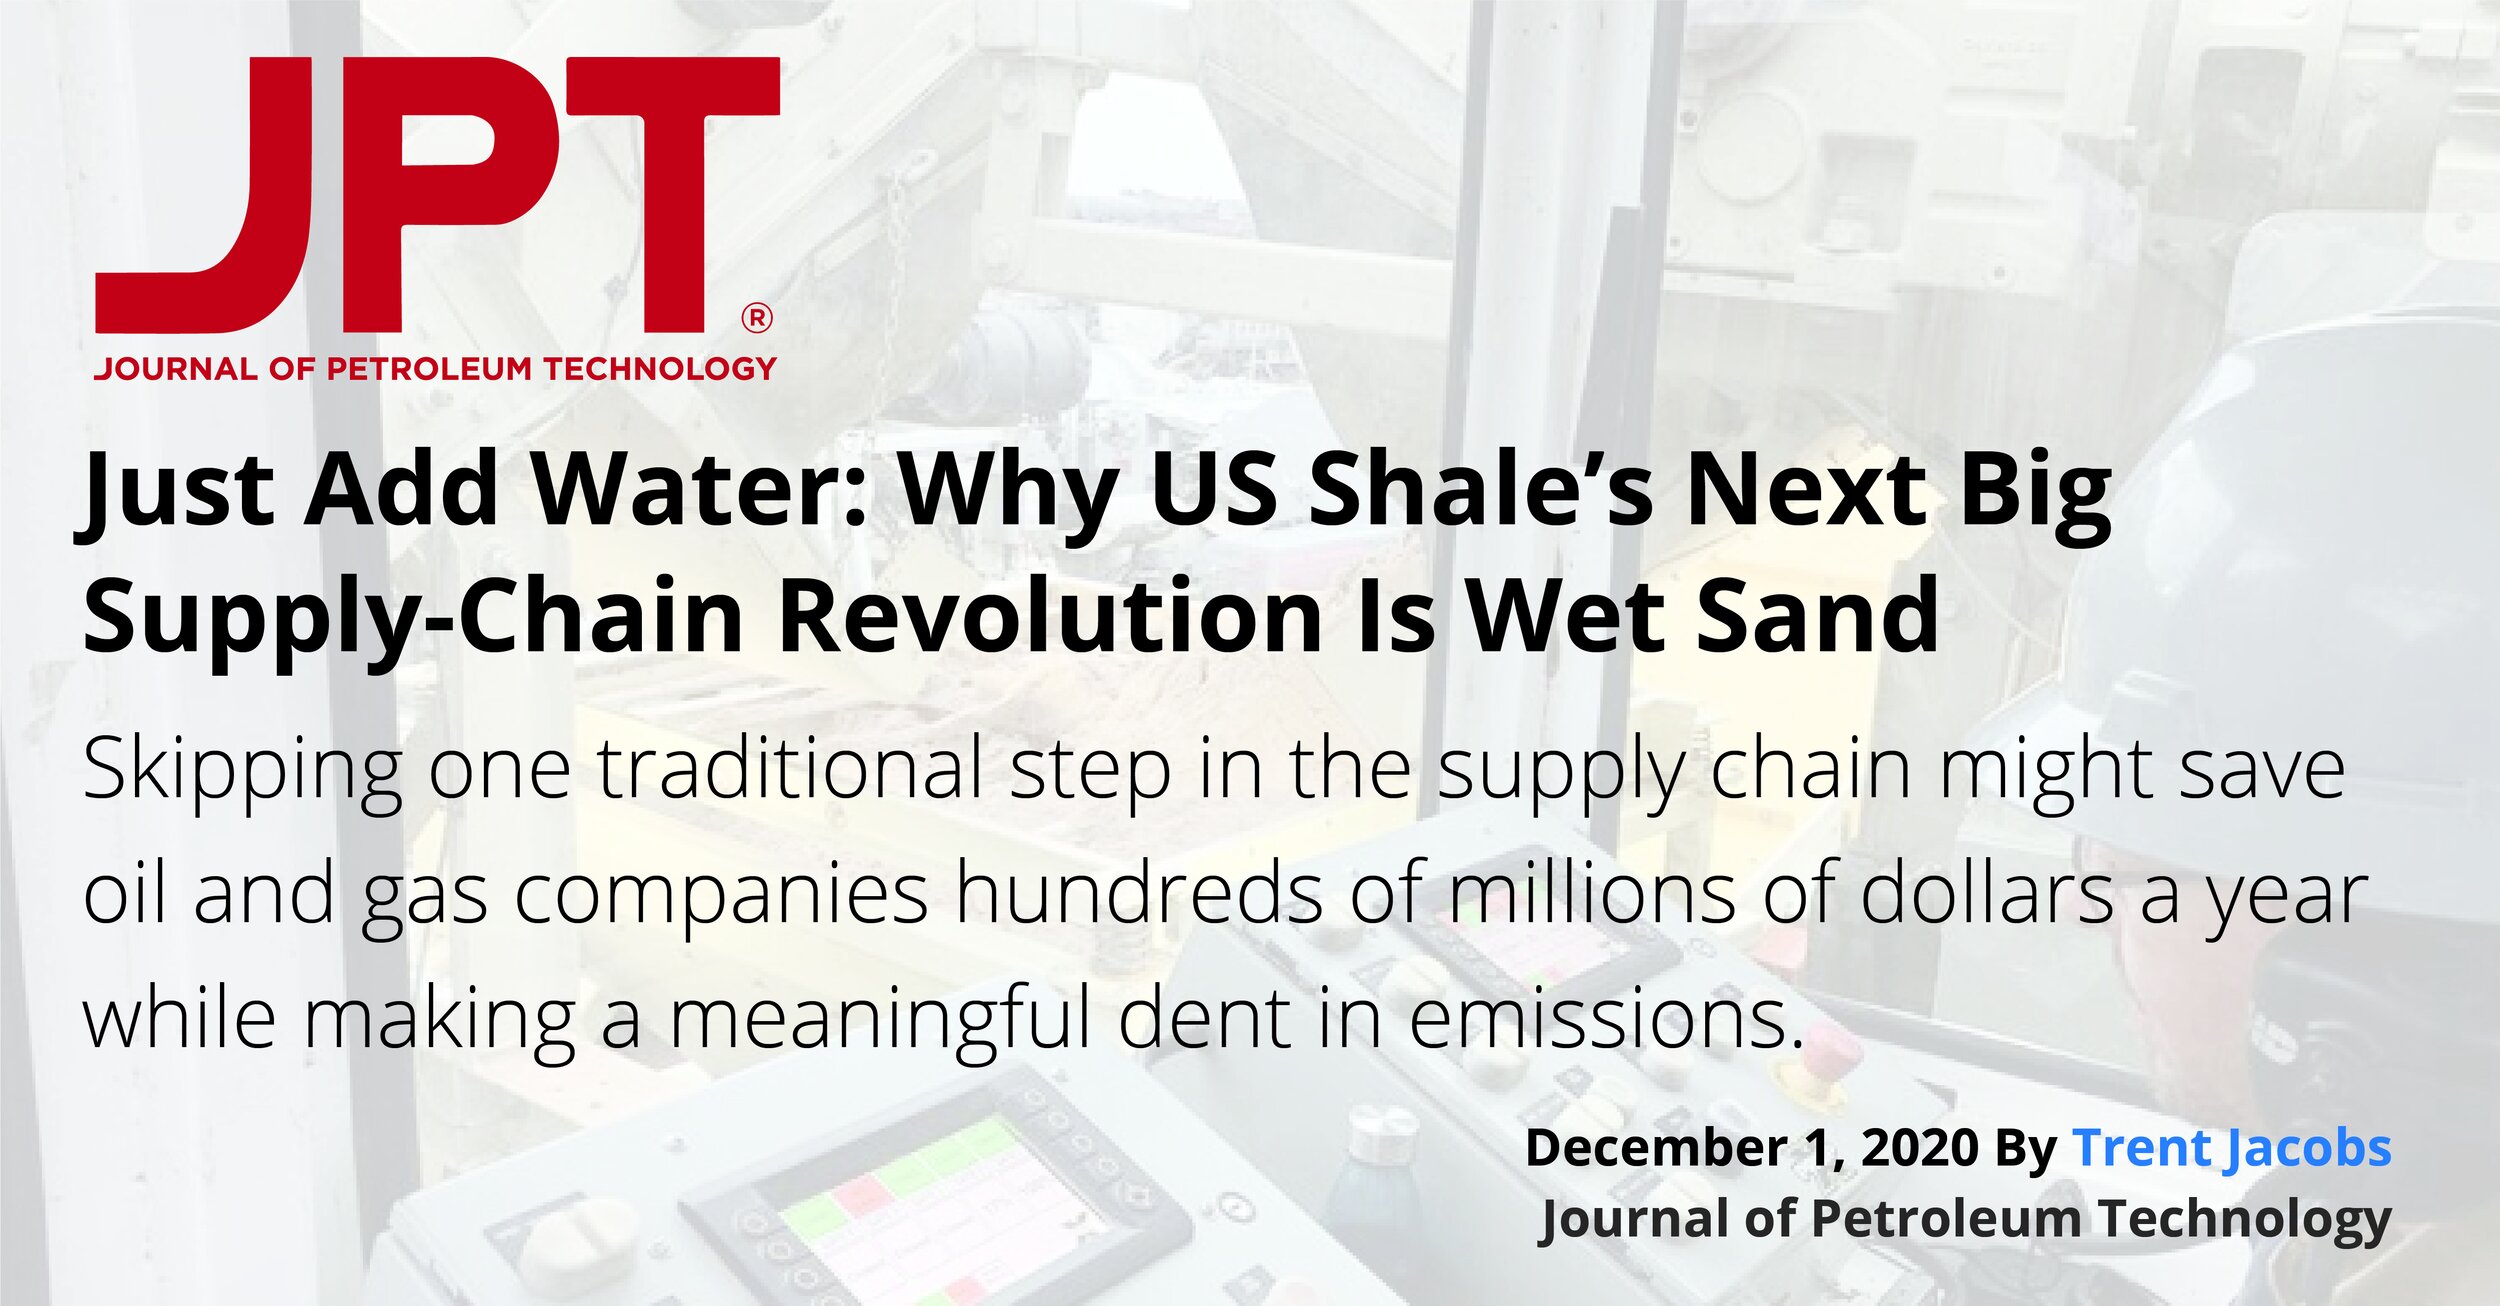 PropX Featured in JPT: Just Add Water: Why US Shale's Next Big